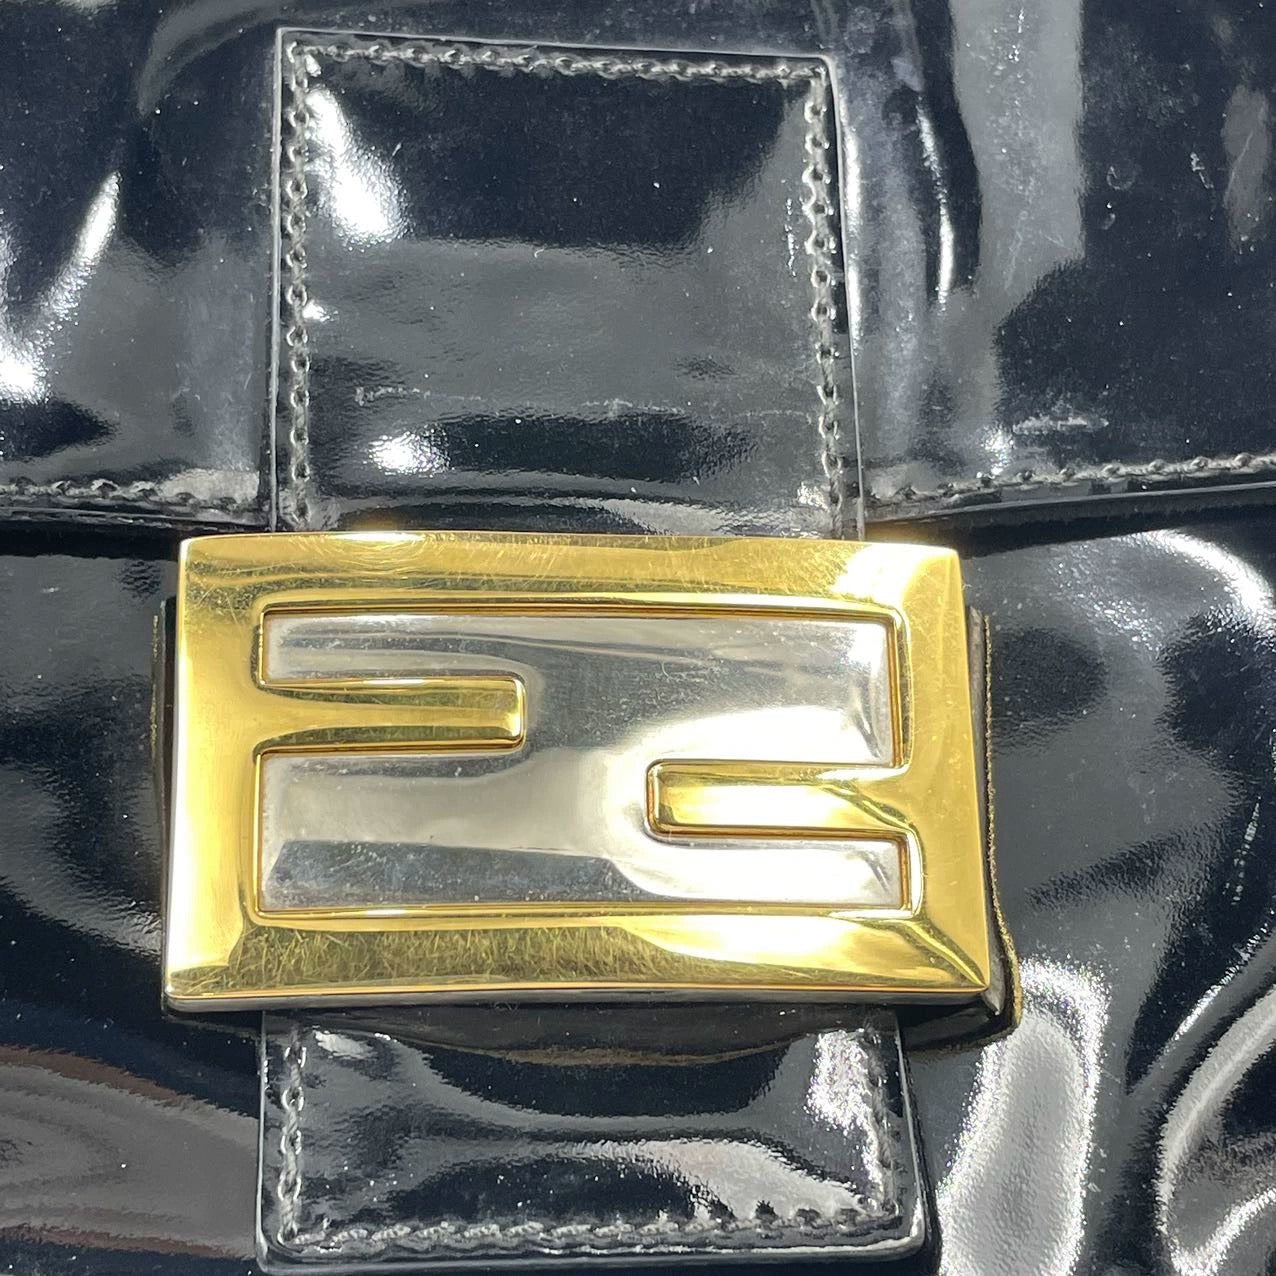 Sold Fendi Baguette Black Patent Leather with Gold Hardware